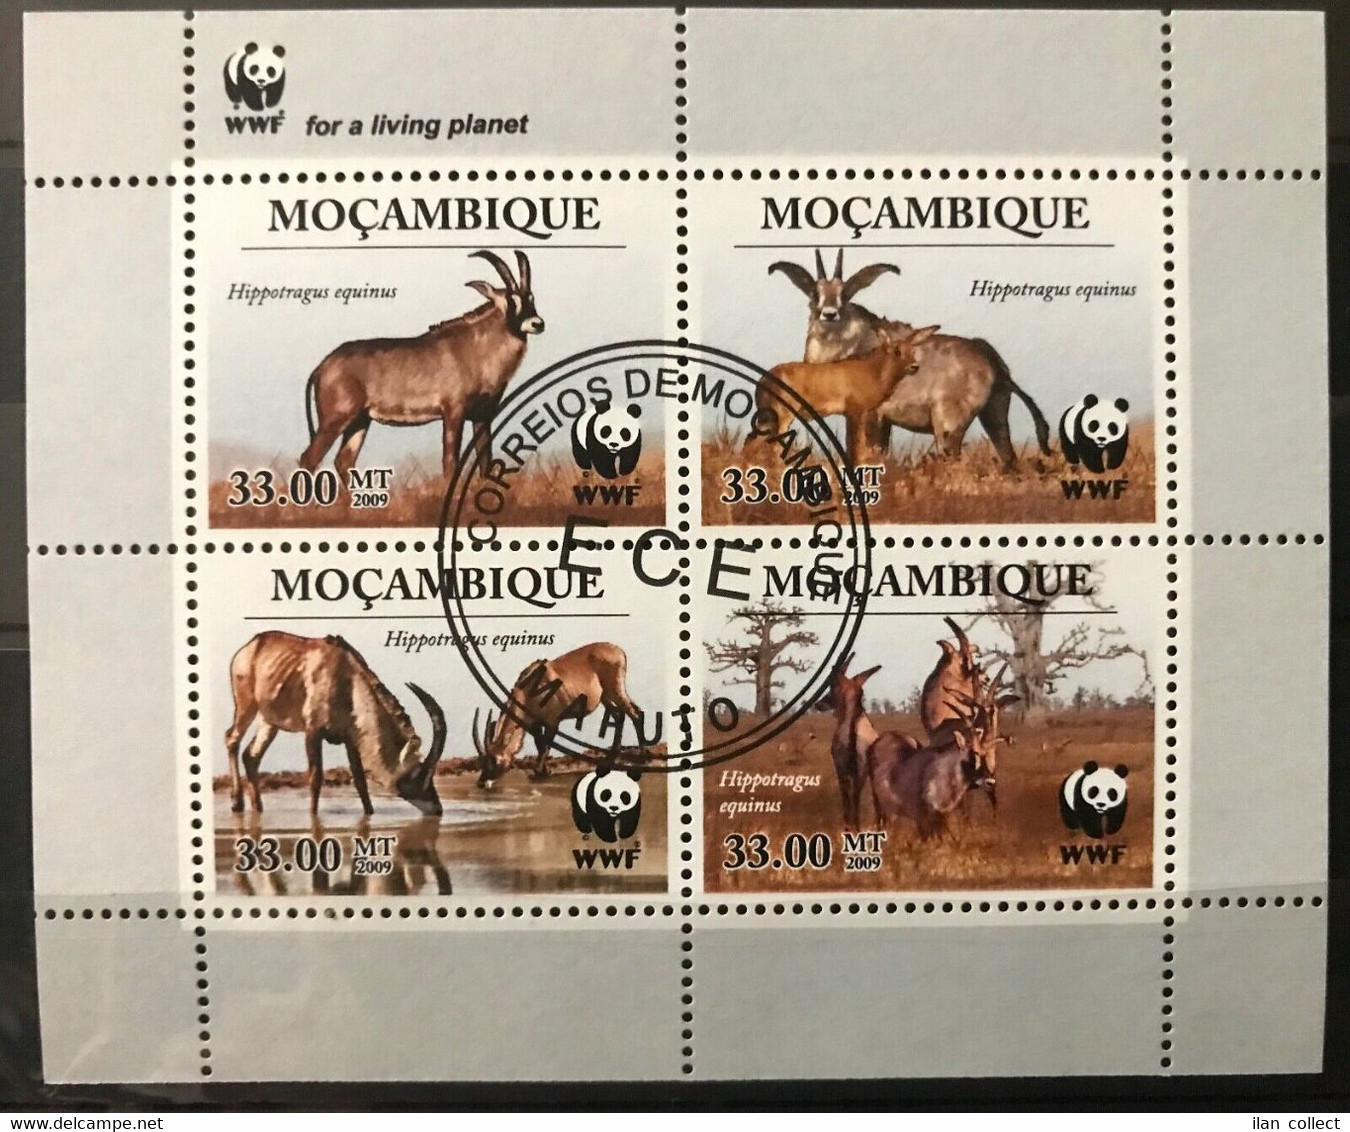 Mozambique - WWF / Animals / Nature - S/S Stamps - CTO - Z9 - Usados